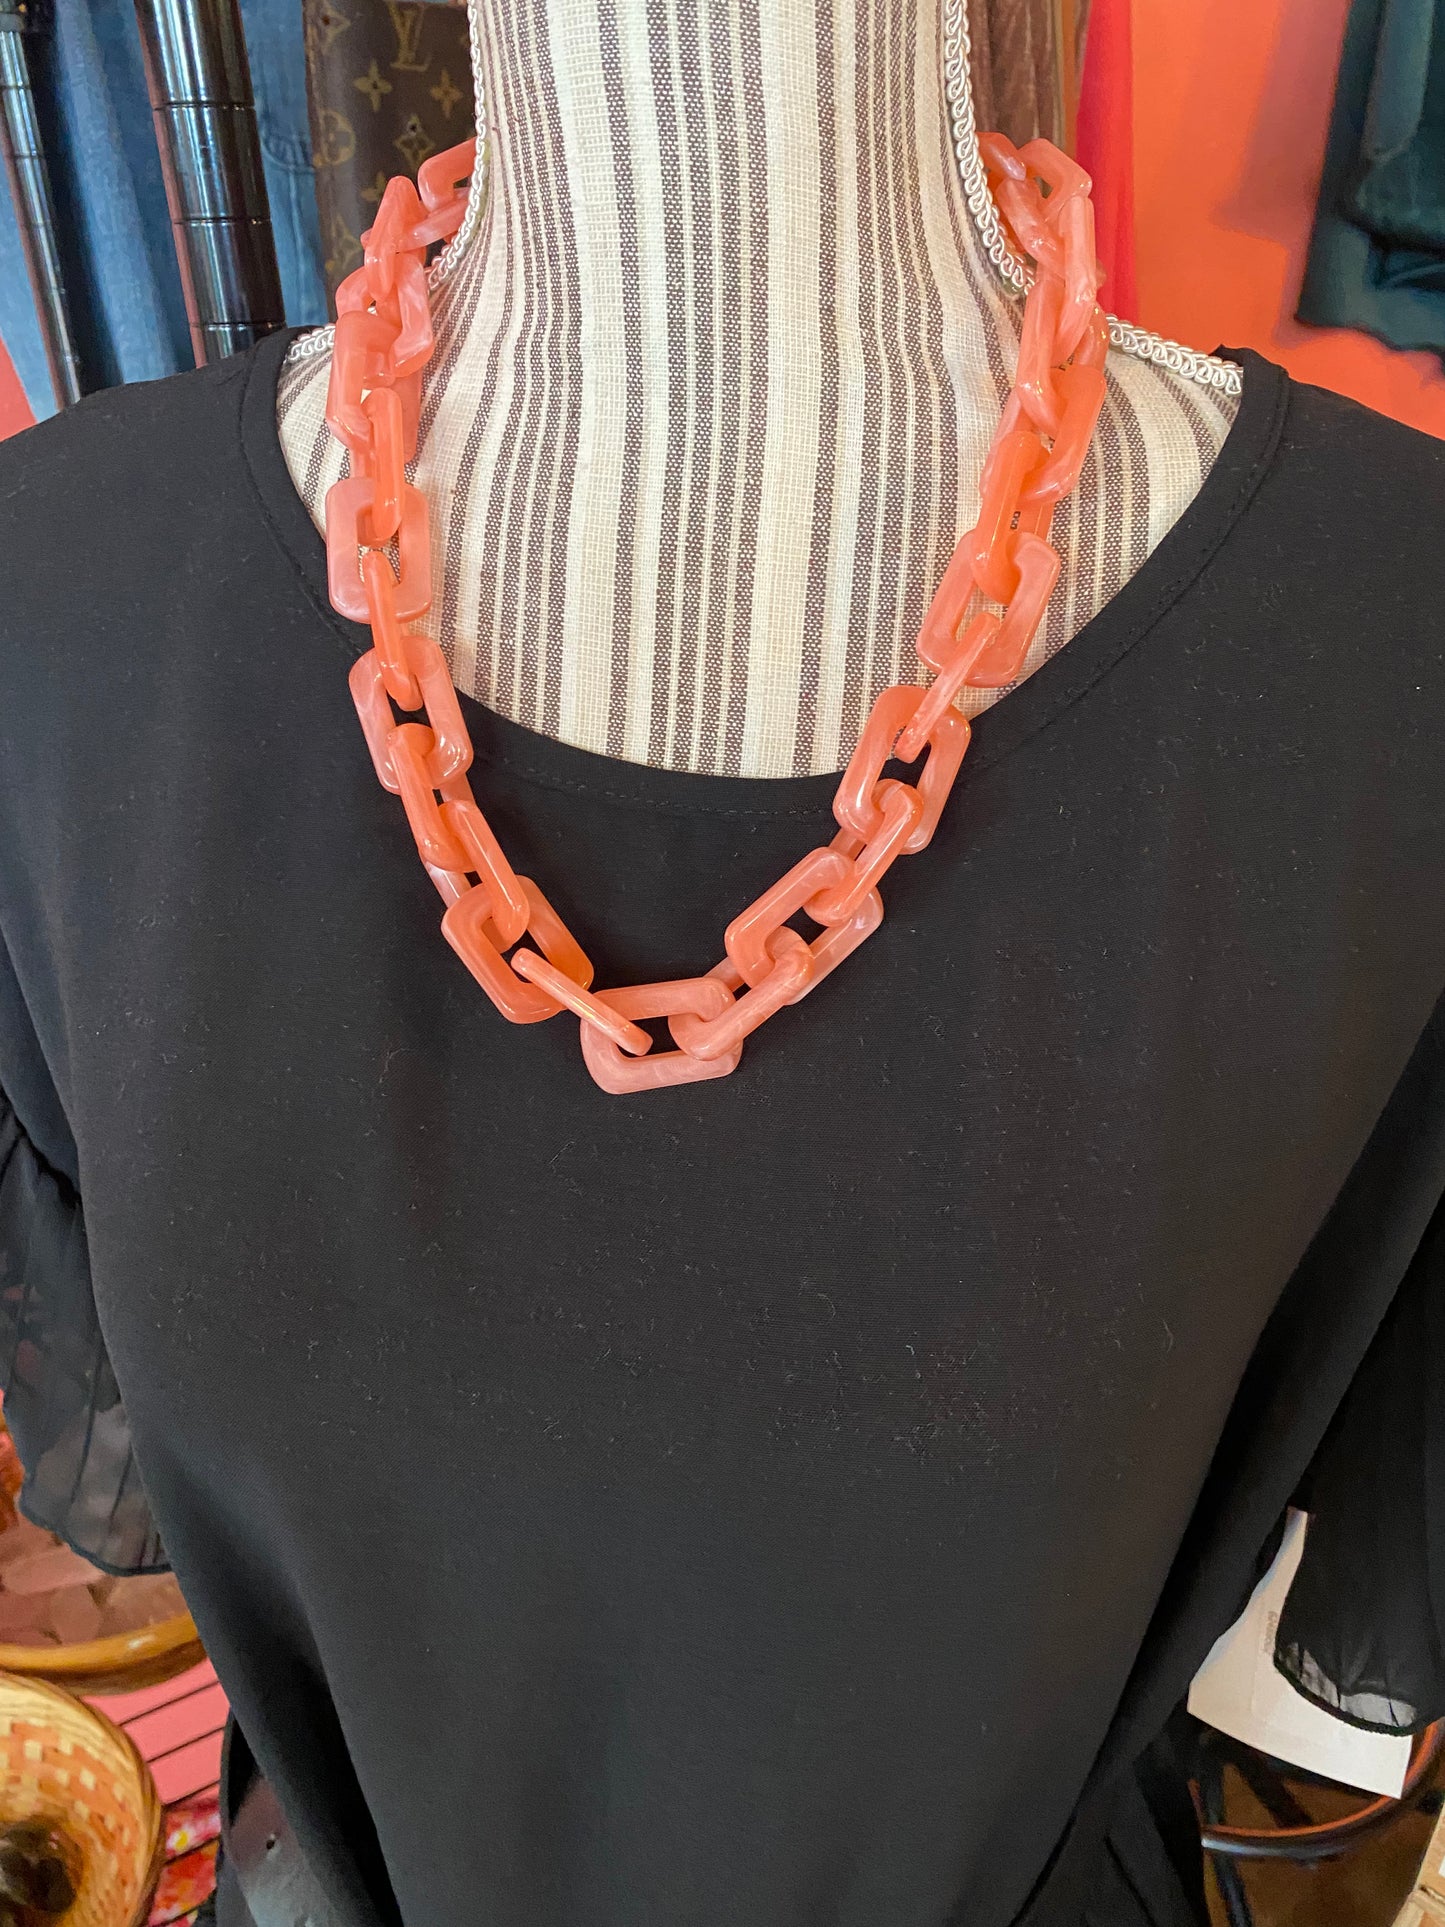 Acrylic chain link necklace